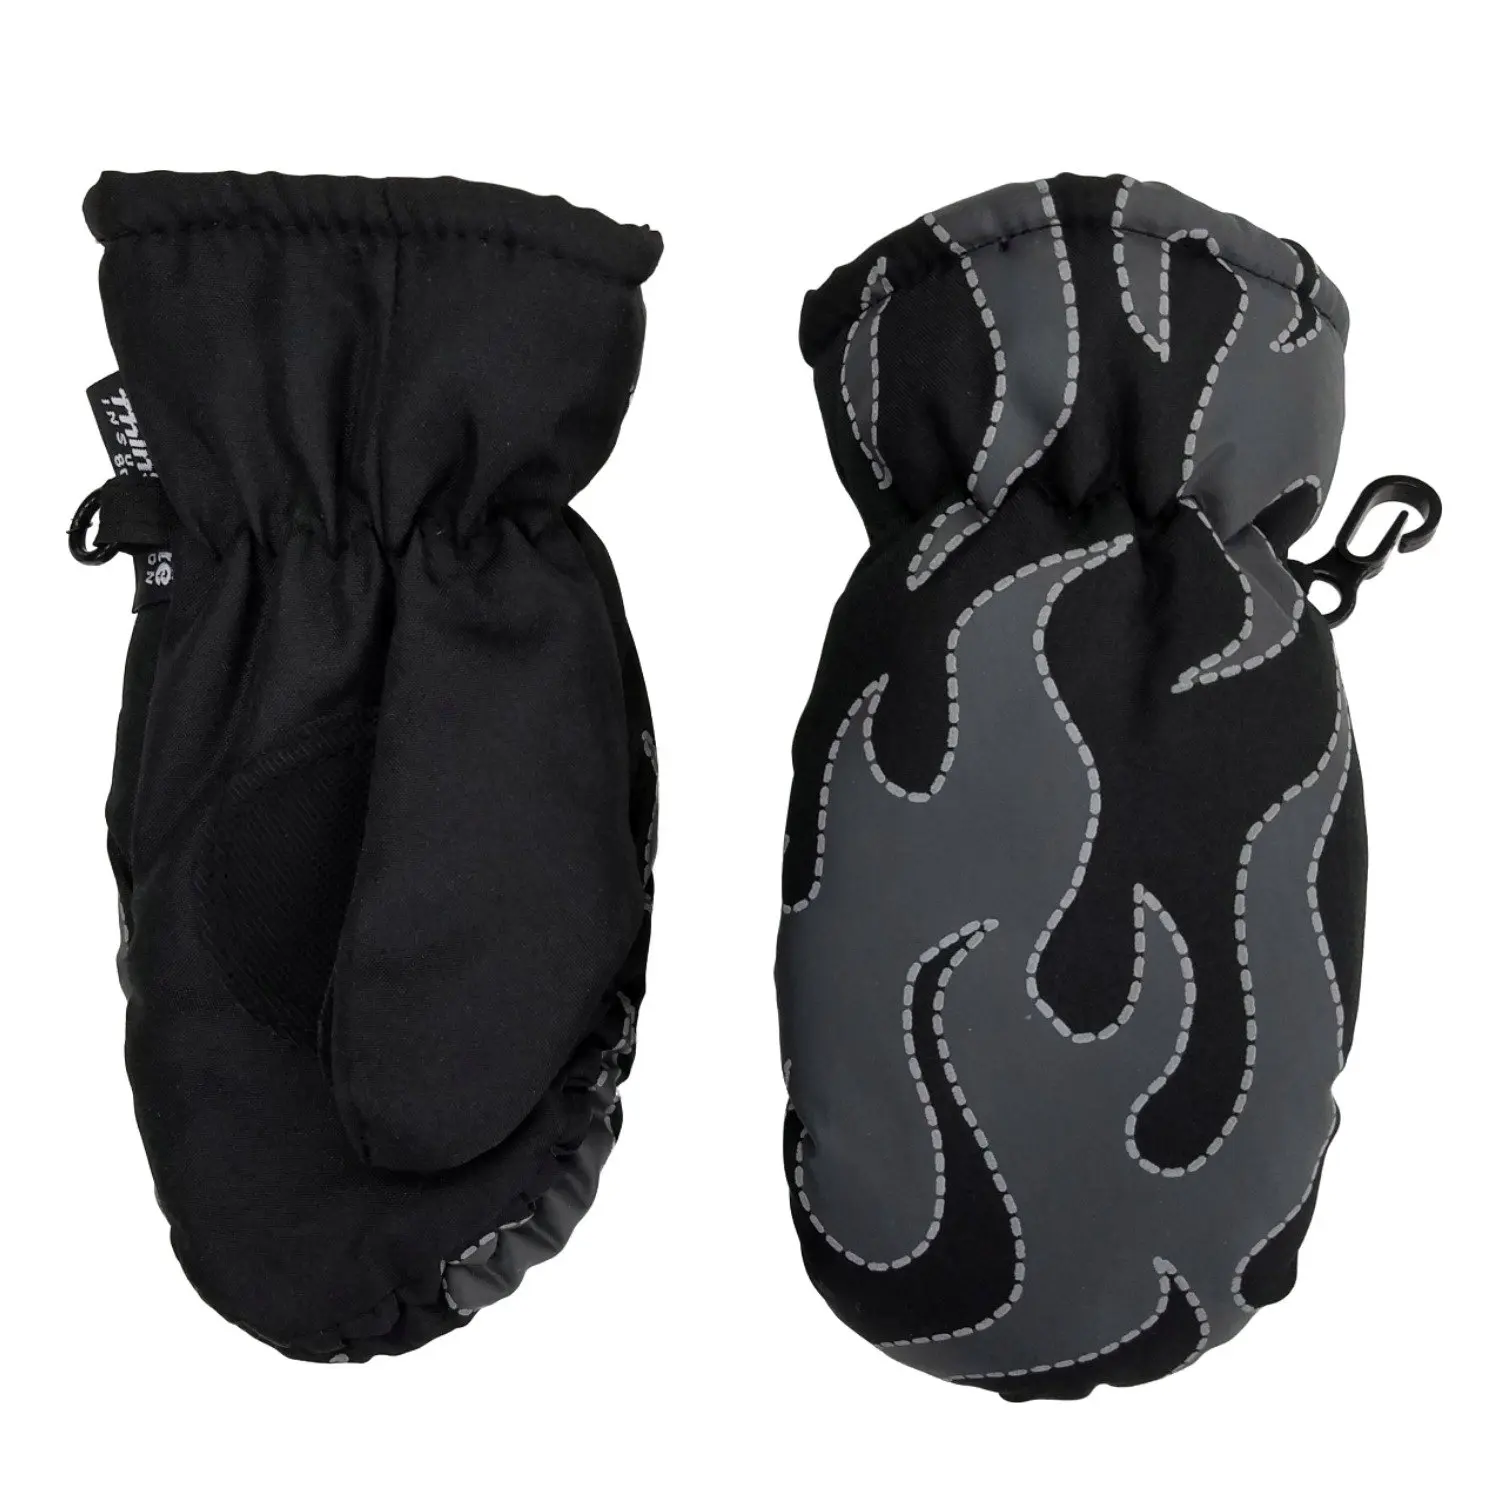 GILBINS Kids Winter Warm Thinsulate And Quilted Breathable Ski Mittens Size 4-6